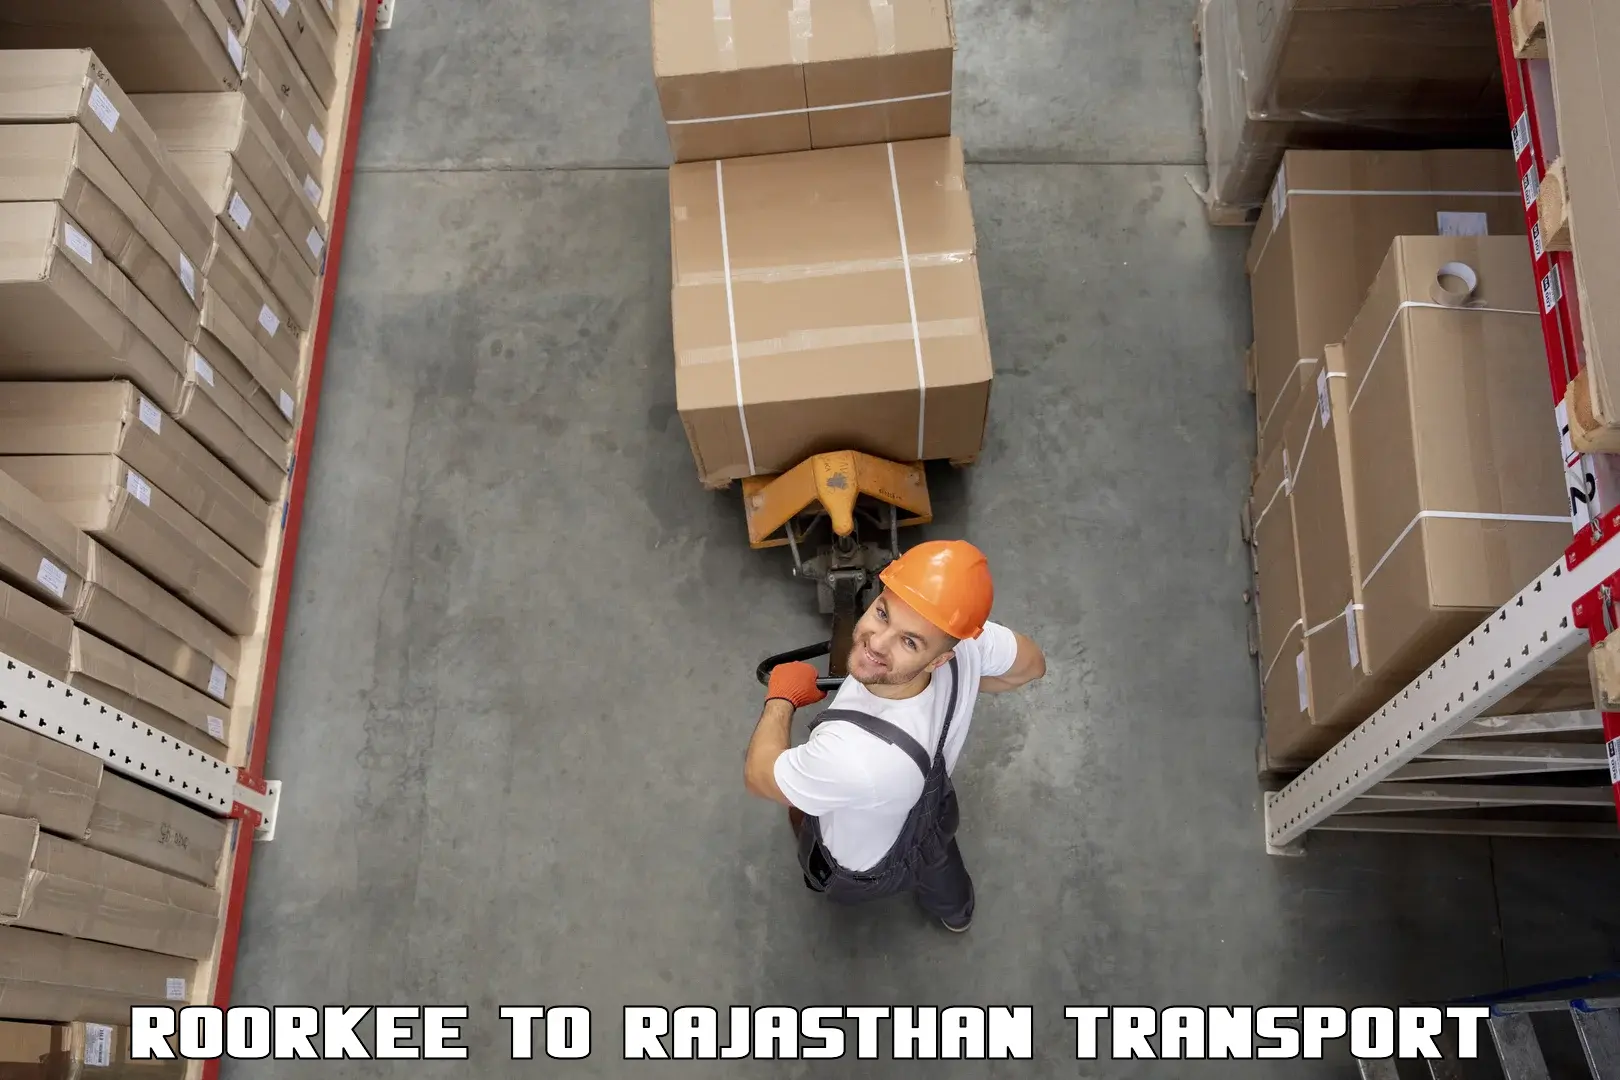 Lorry transport service Roorkee to Udaipur